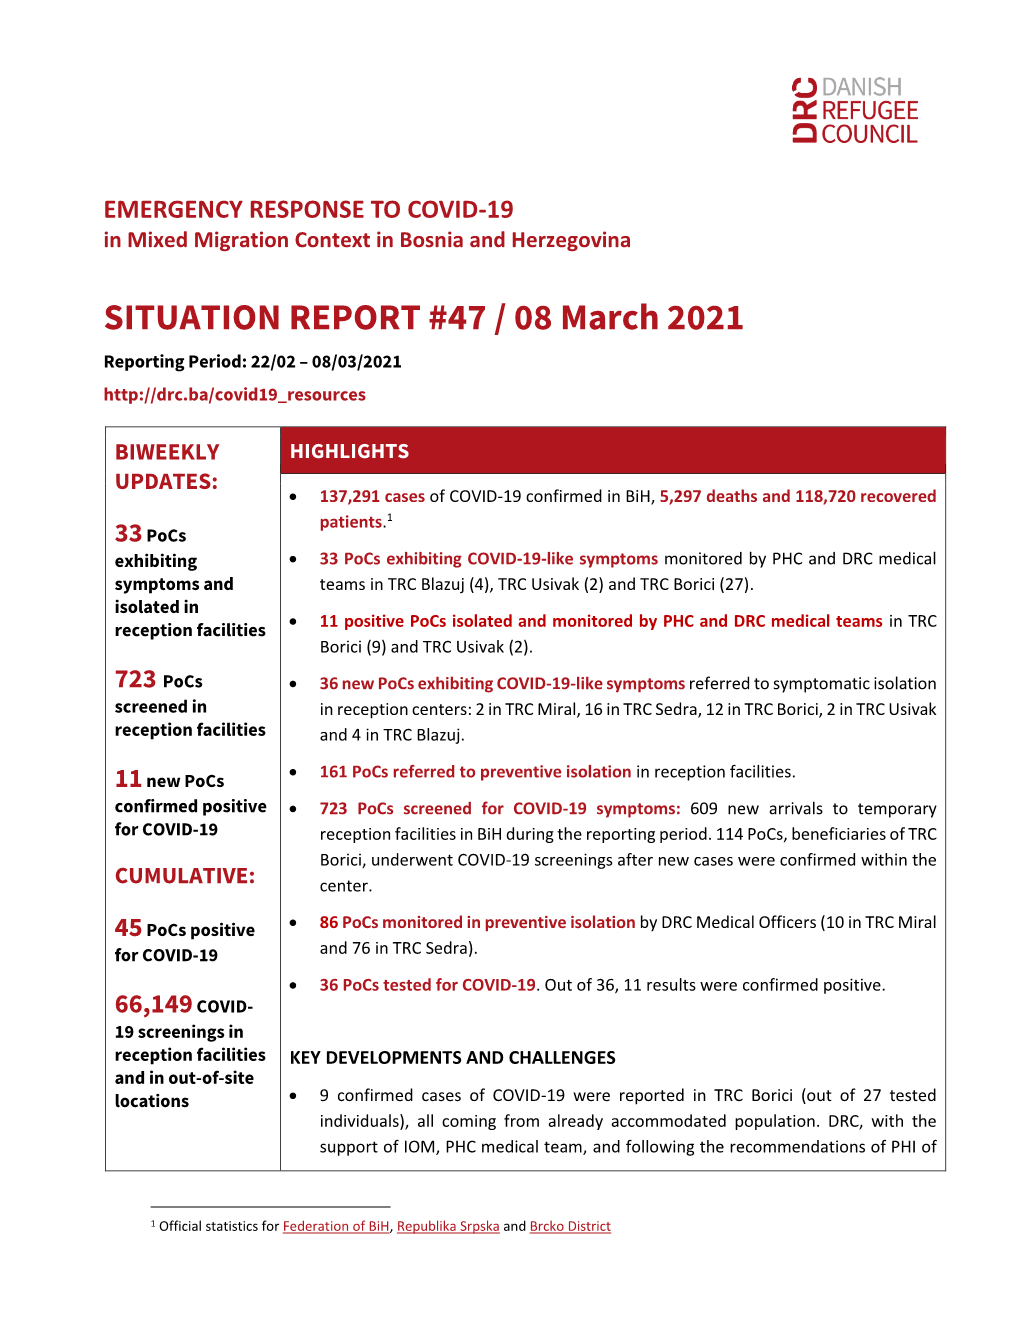 SITUATION REPORT #47 / 08 March 2021 Reporting Period: 22/02 – 08/03/2021